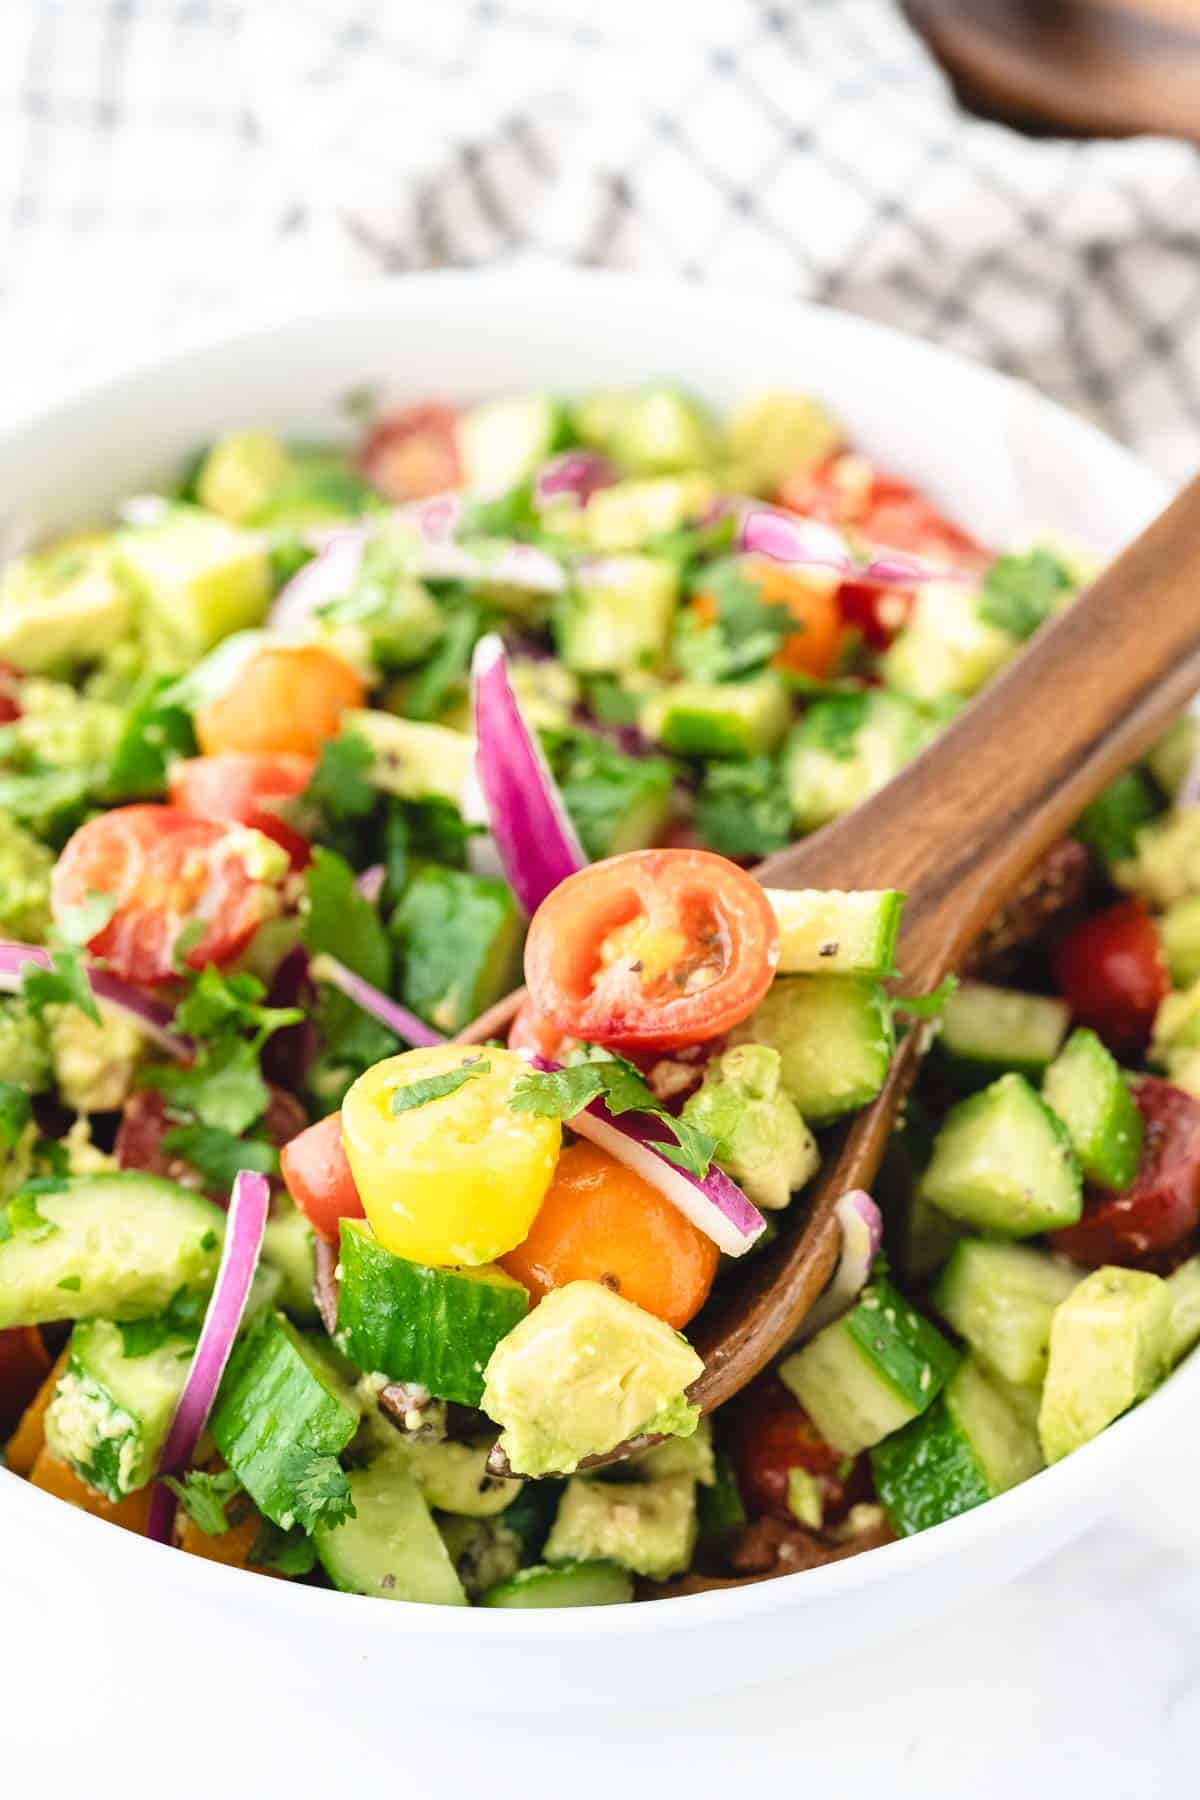 A wooden spoon removing a scoop of avocado salad with cucumbers, tomatoes, and onions.